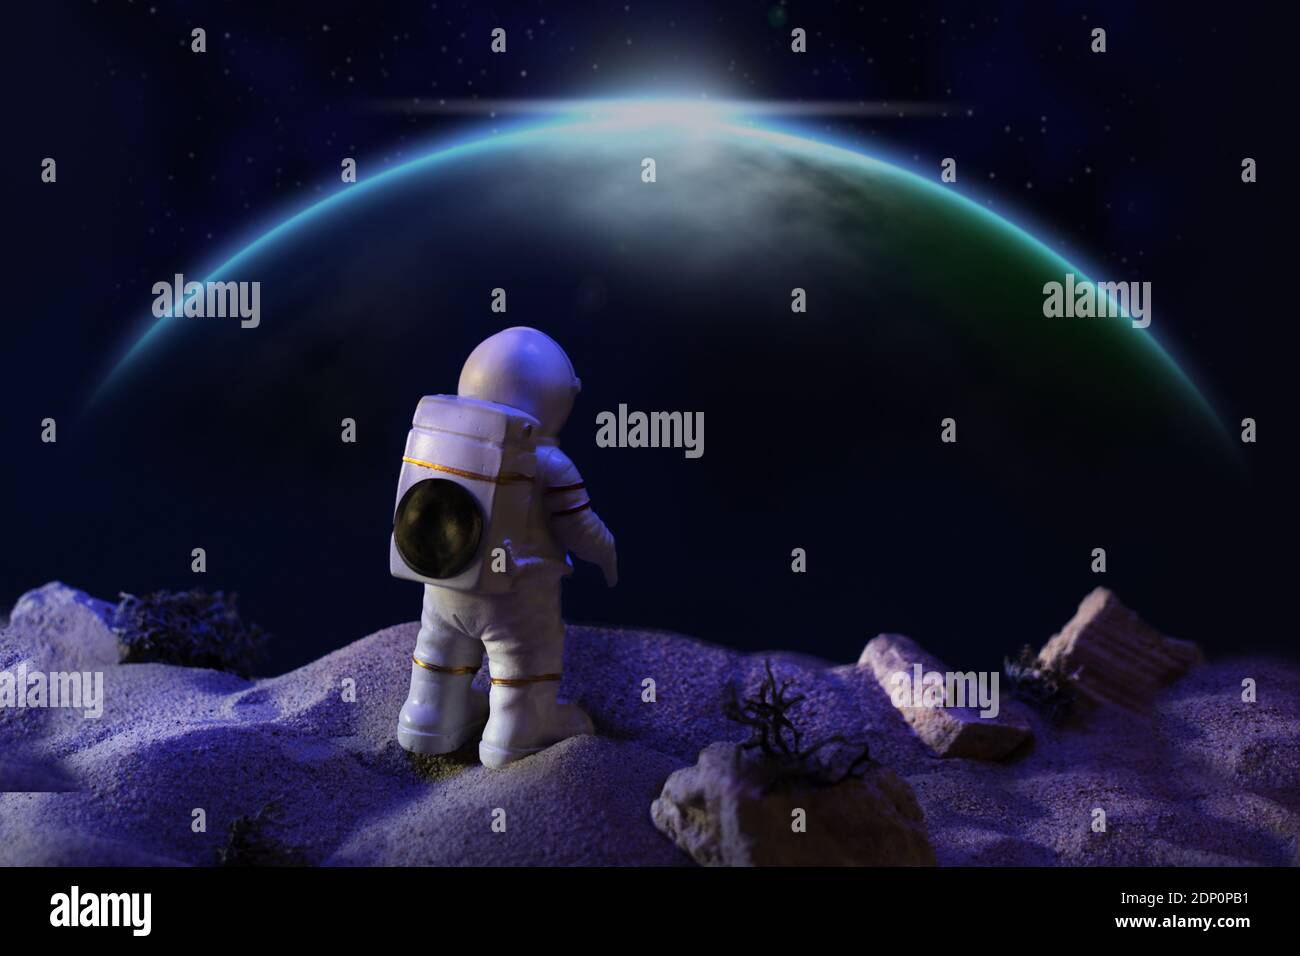 Astronaut in a space suit looking at galaxy. Space travel concept. Stock Photo